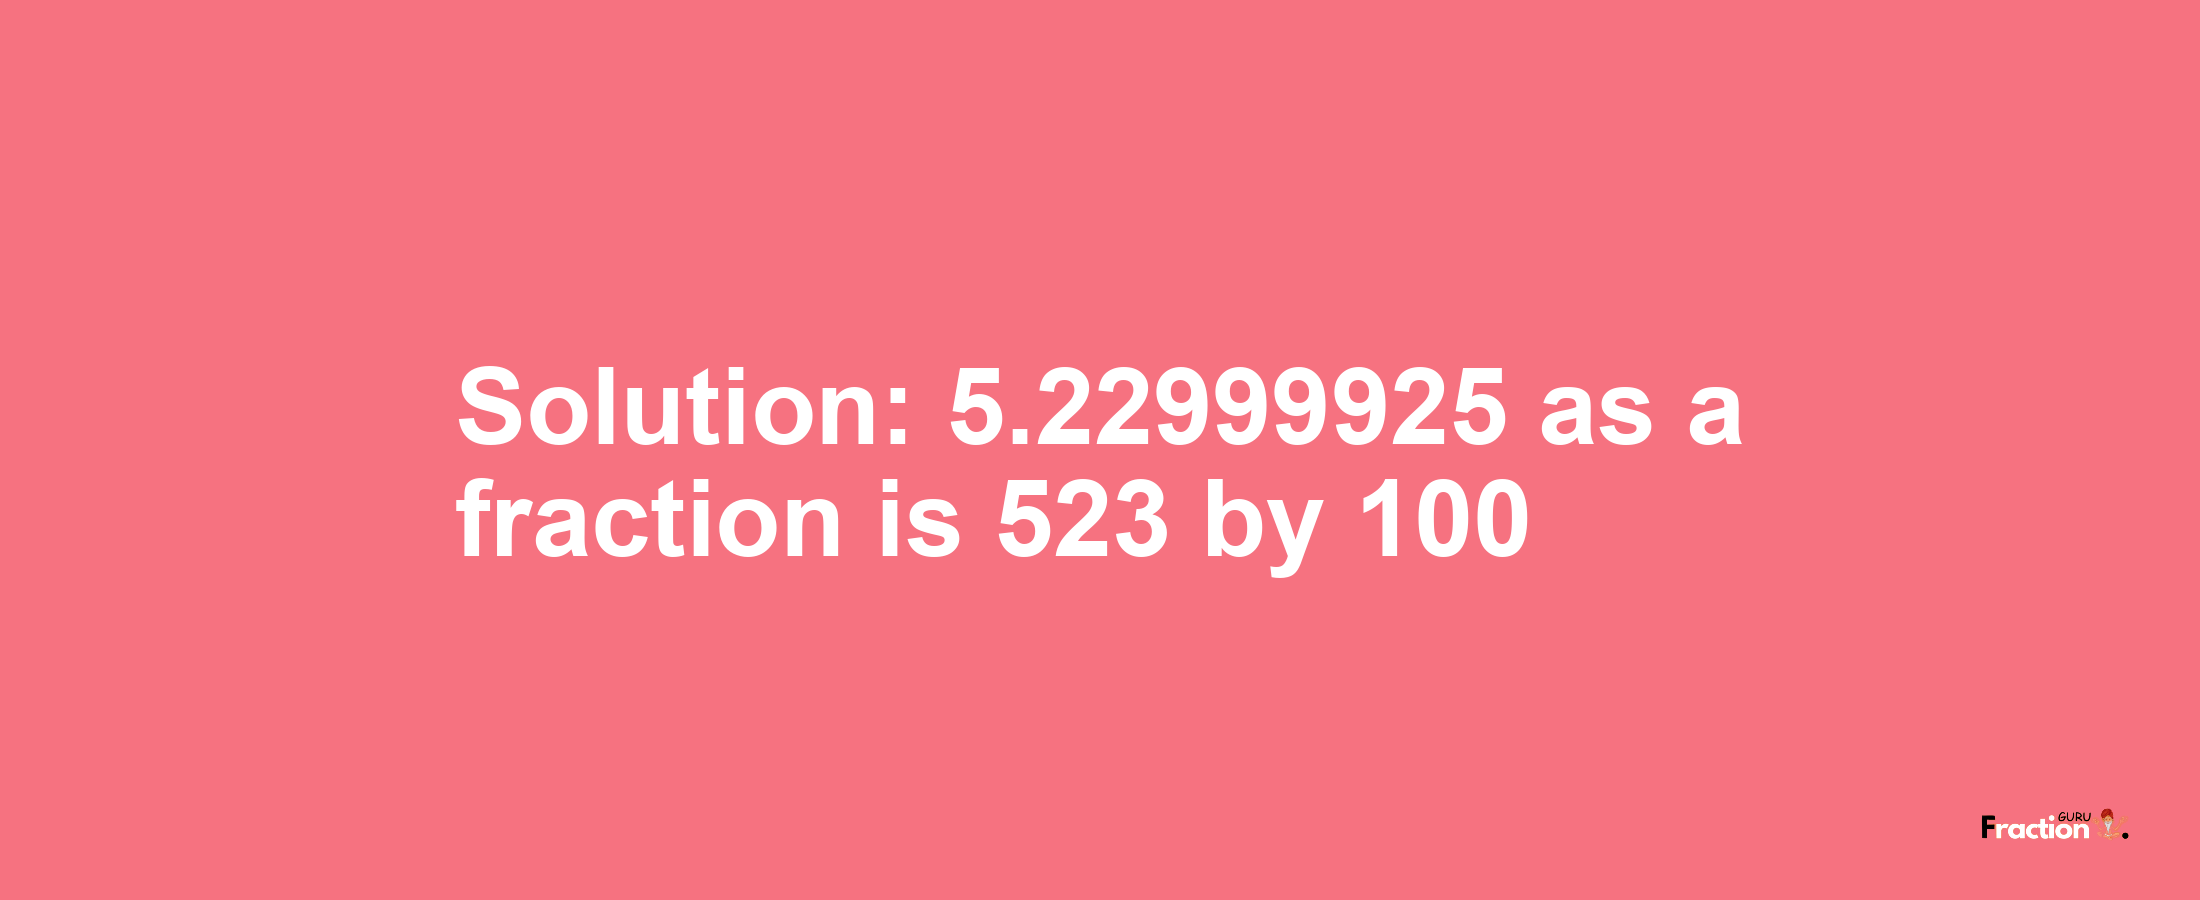 Solution:5.22999925 as a fraction is 523/100